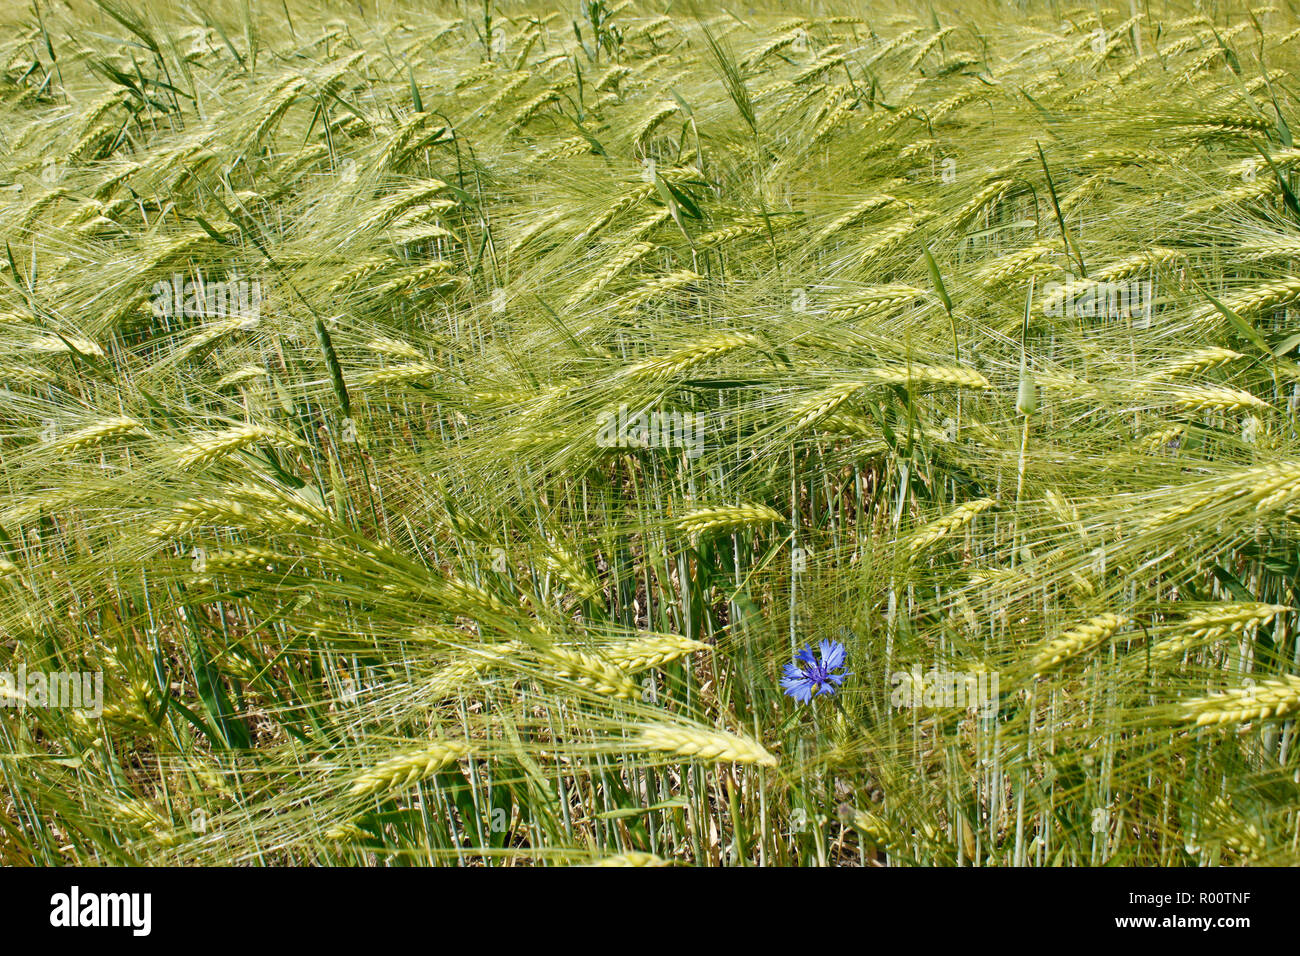 Barley field during flowering period. Fine day in early summer Stock Photo